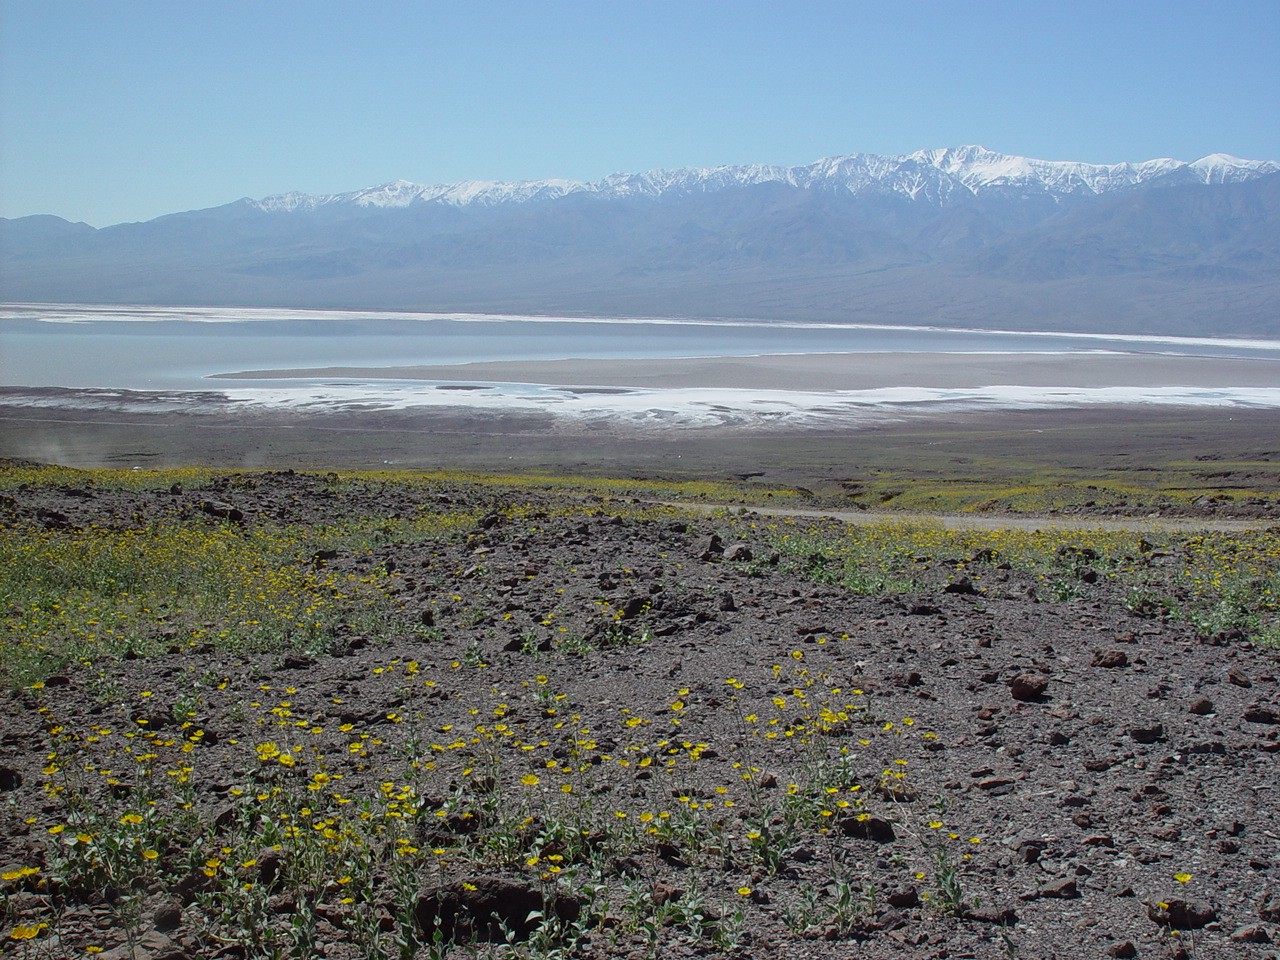 Blooming desert and flooded playa (2005)